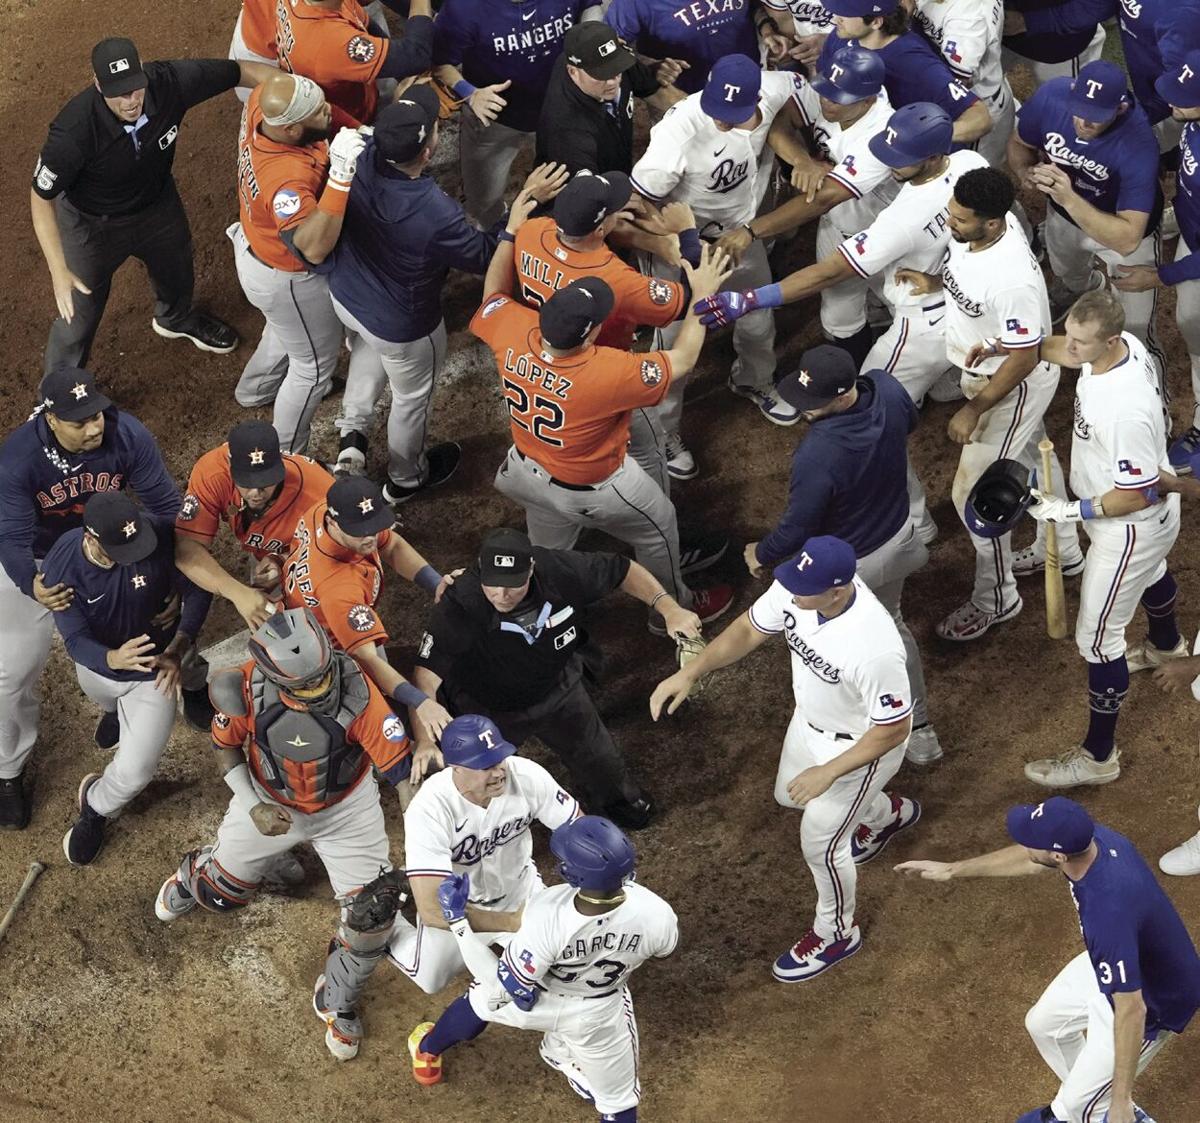 Rangers, Astros to continue wild series in Game 6 of ALCS